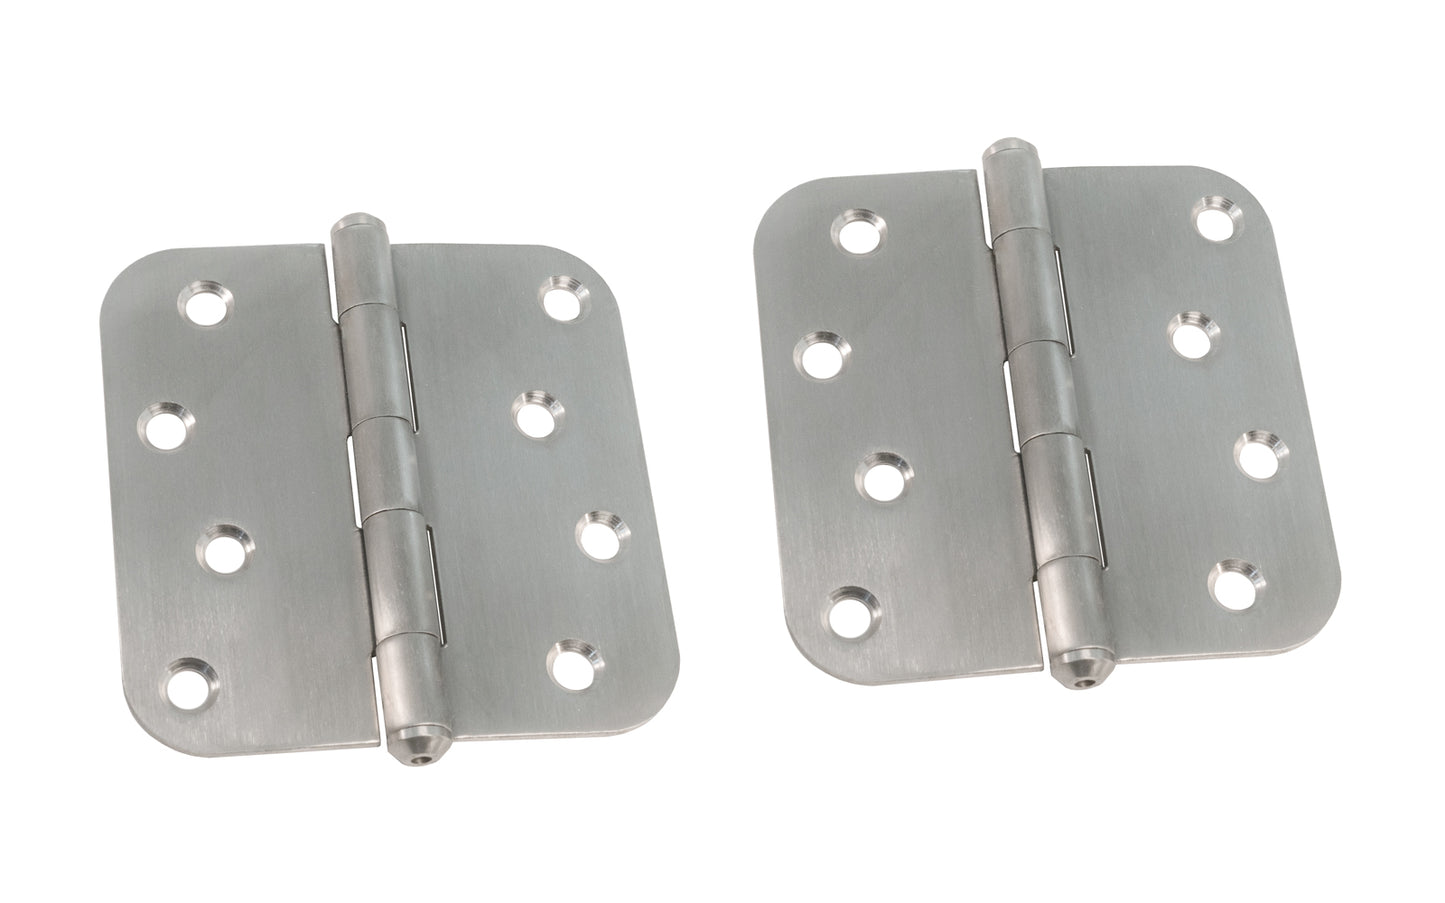 A Pair of 4" Stainless Finish Door Hinges with 5/8" corner radius. Satin stainless finish color on steel material. Sold as a pair of hinges. Fixed pin.  Ultra Hardware No. 35051.